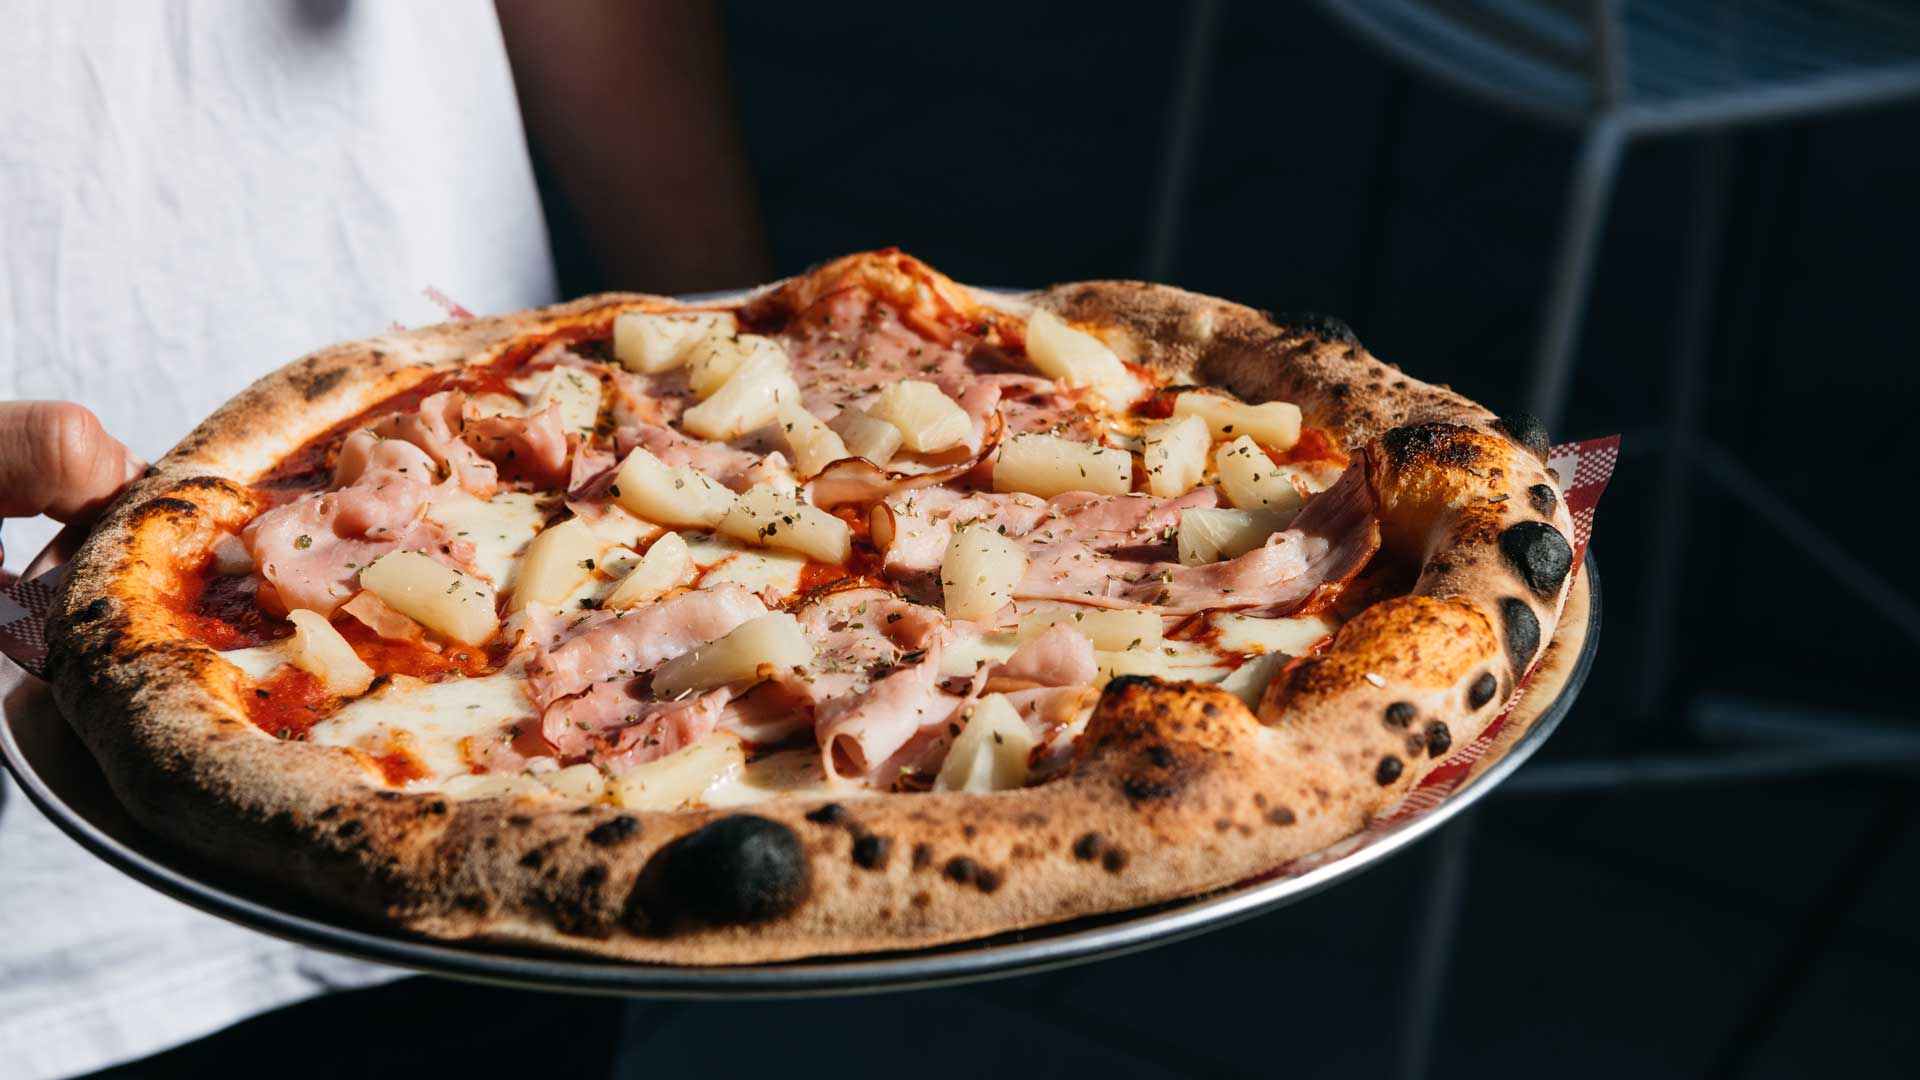 Antico's Is the New Family-Run Pizzeria Located Upstairs at the Beach Road Hotel